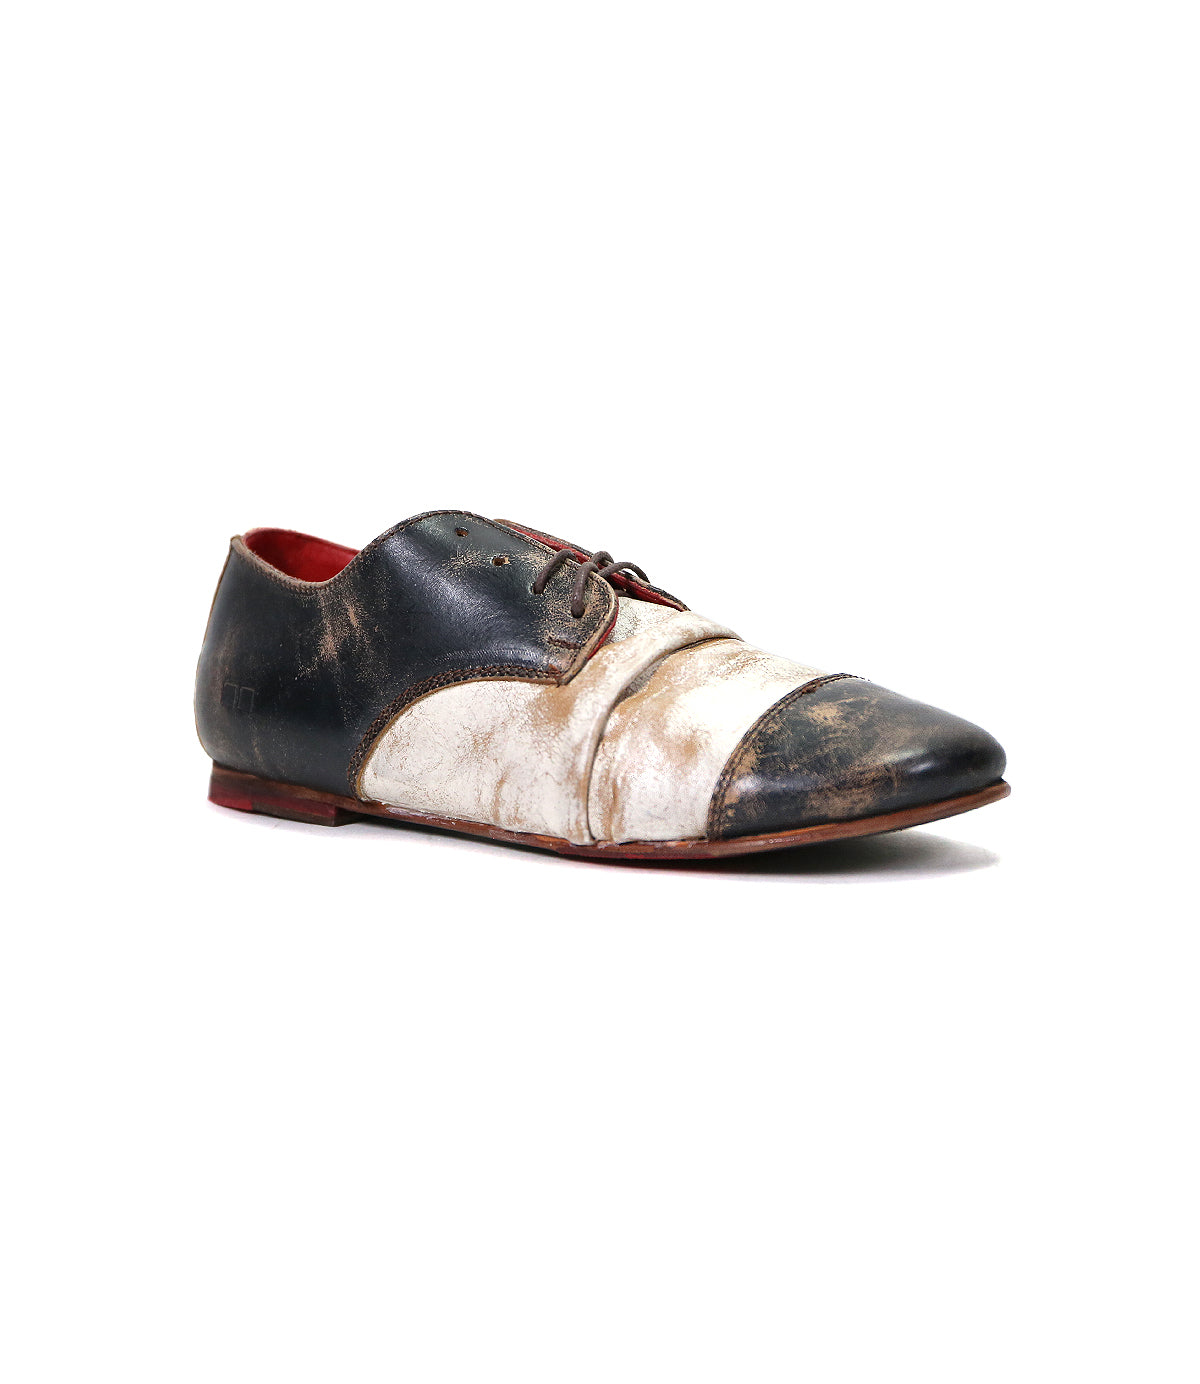 A worn-out Bed Stu Rumba II wingtip black and white men's dress shoe isolated on a white background.